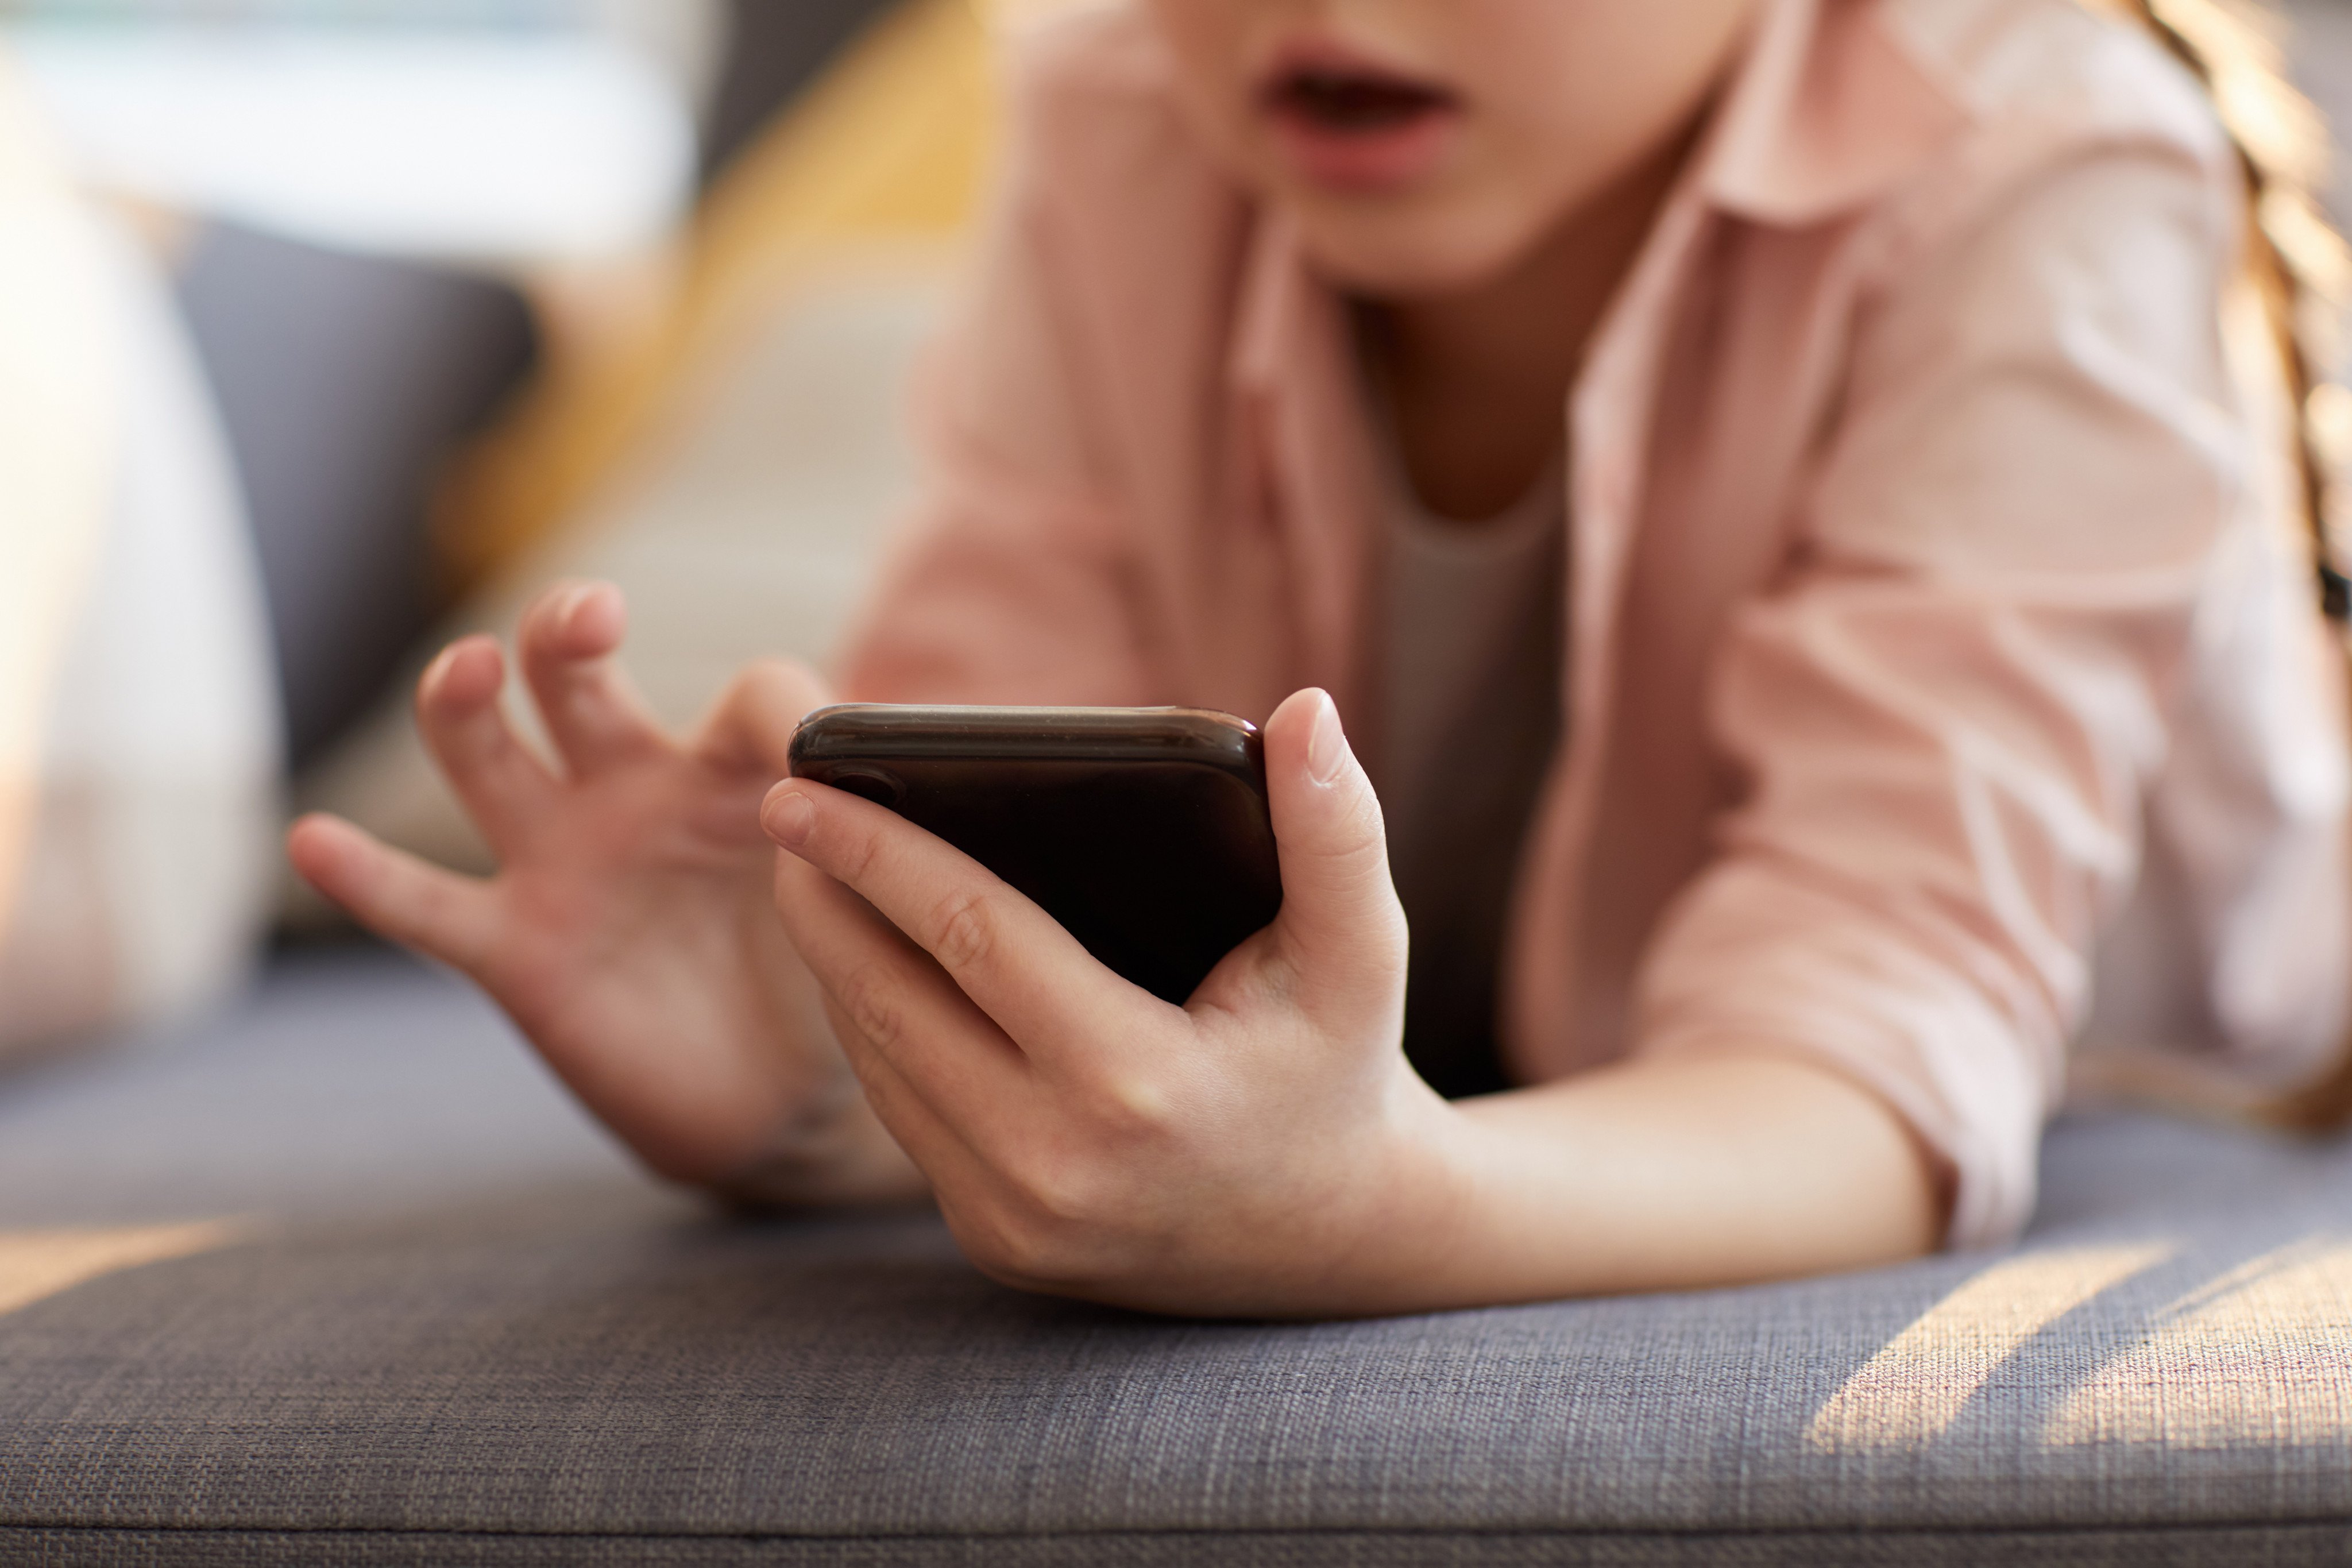 The online sexual exploitation of an 11-year-old girl has sparked a police warning to parents to monitor internet use by children. Photo: Shutterstock